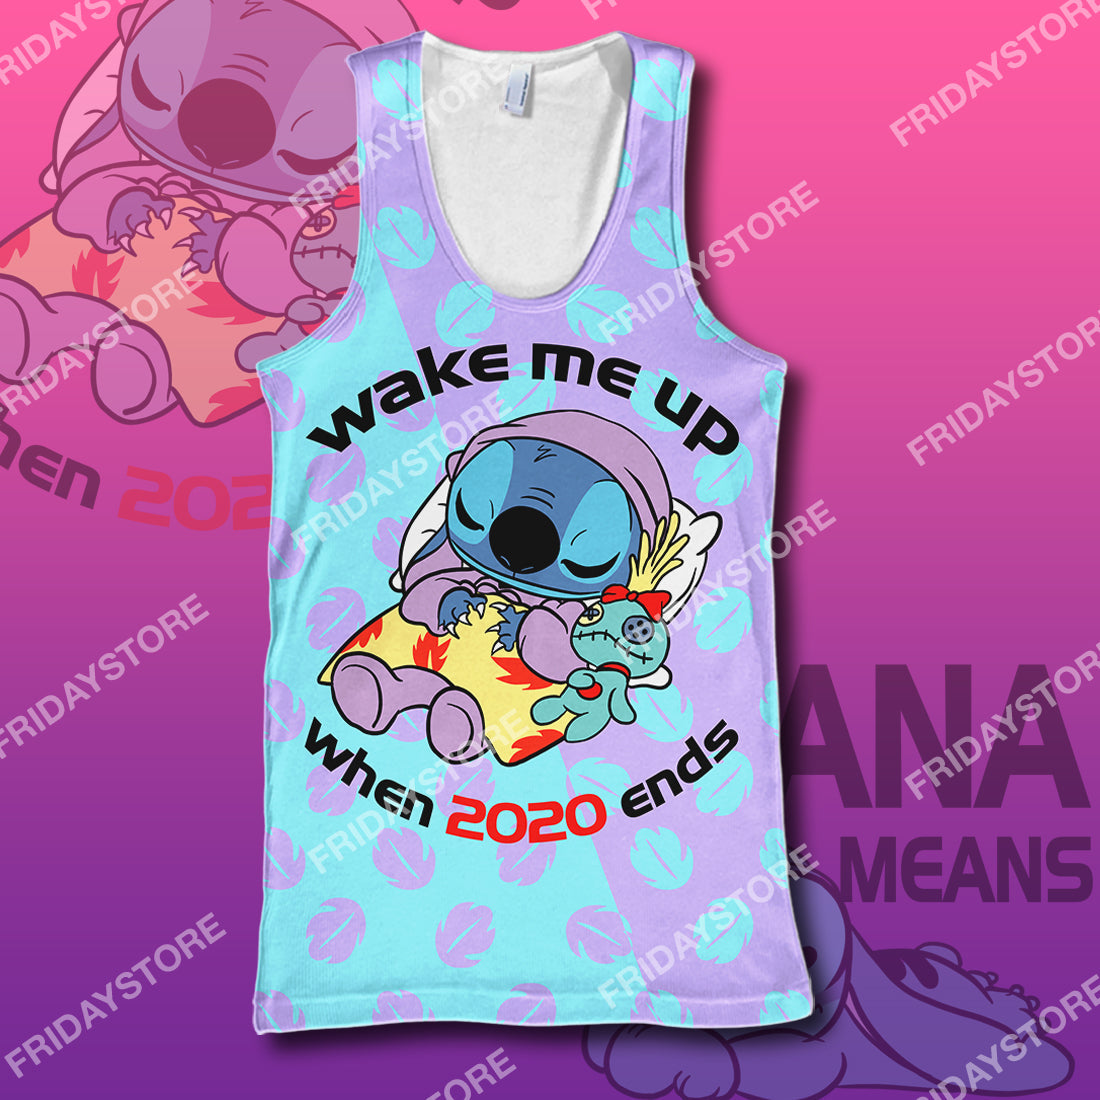 Unifinz LAS T-shirt Wake Me Up When 2020 Ends T-shirt Awesome High Quality DN Stitch Hoodie Sweater Tank 2026